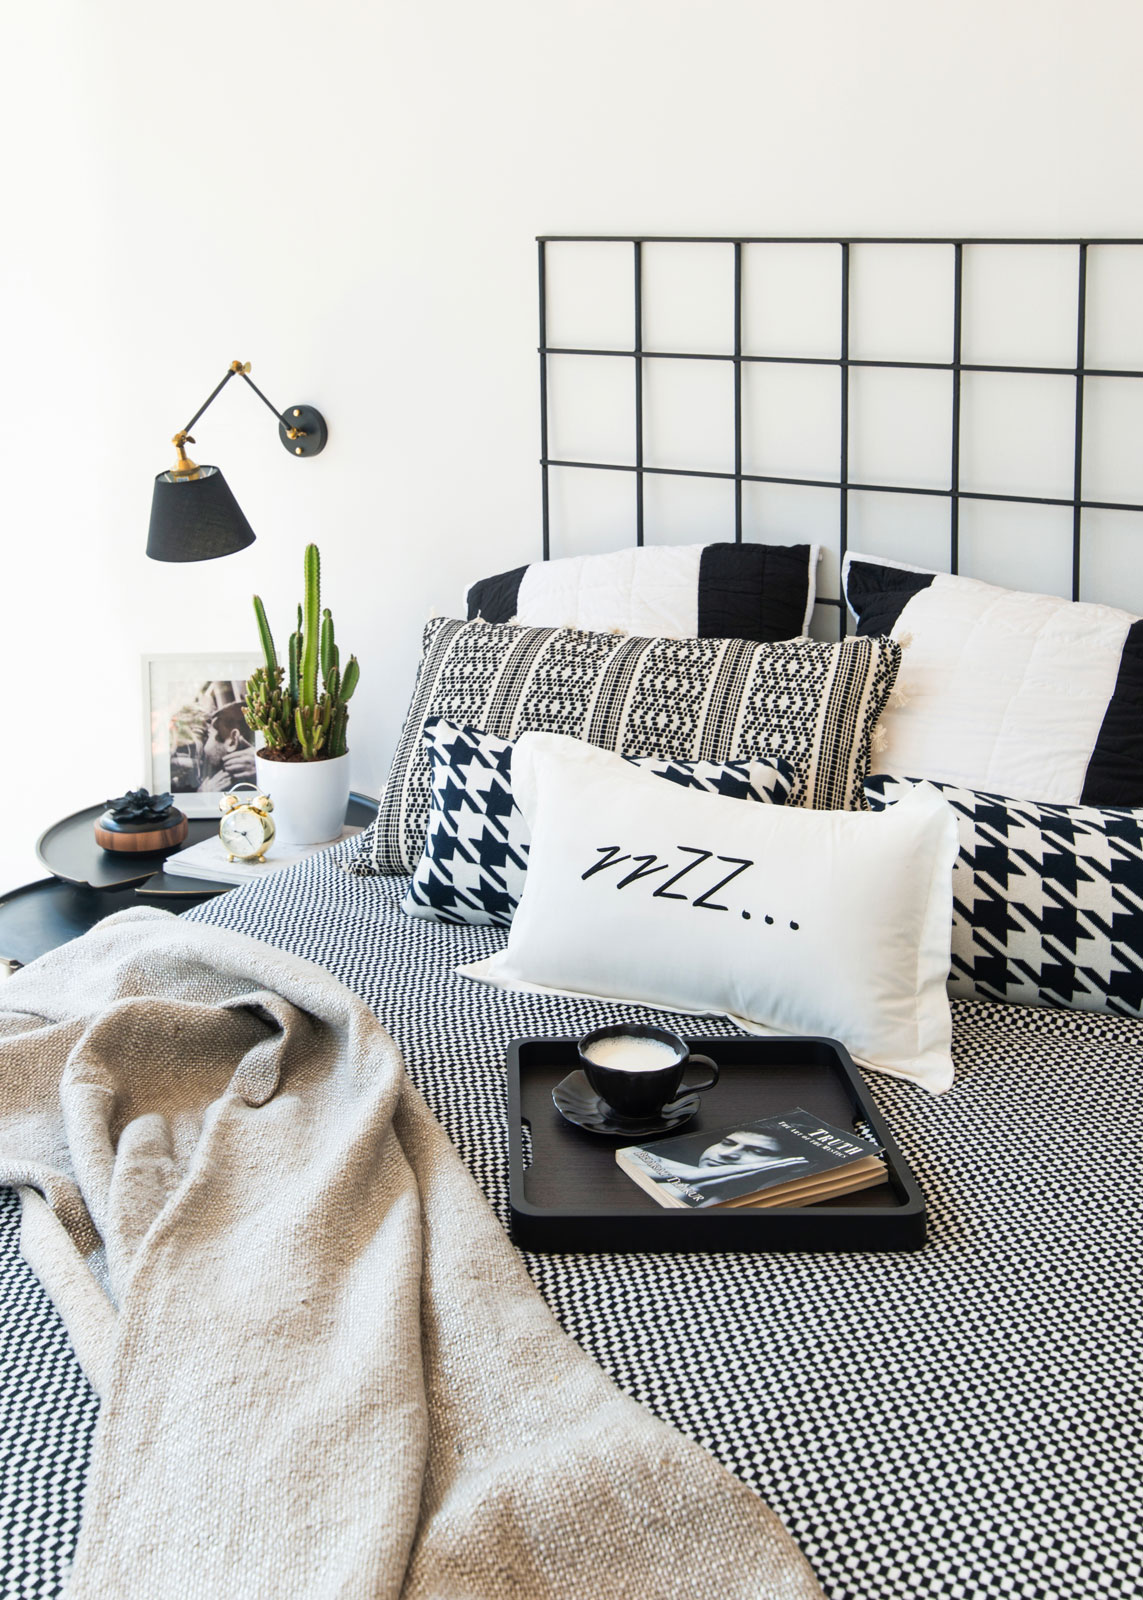 Black, White & Grey Bedroom Design With Black Wall Lamp & Side Table - Beautiful Homes